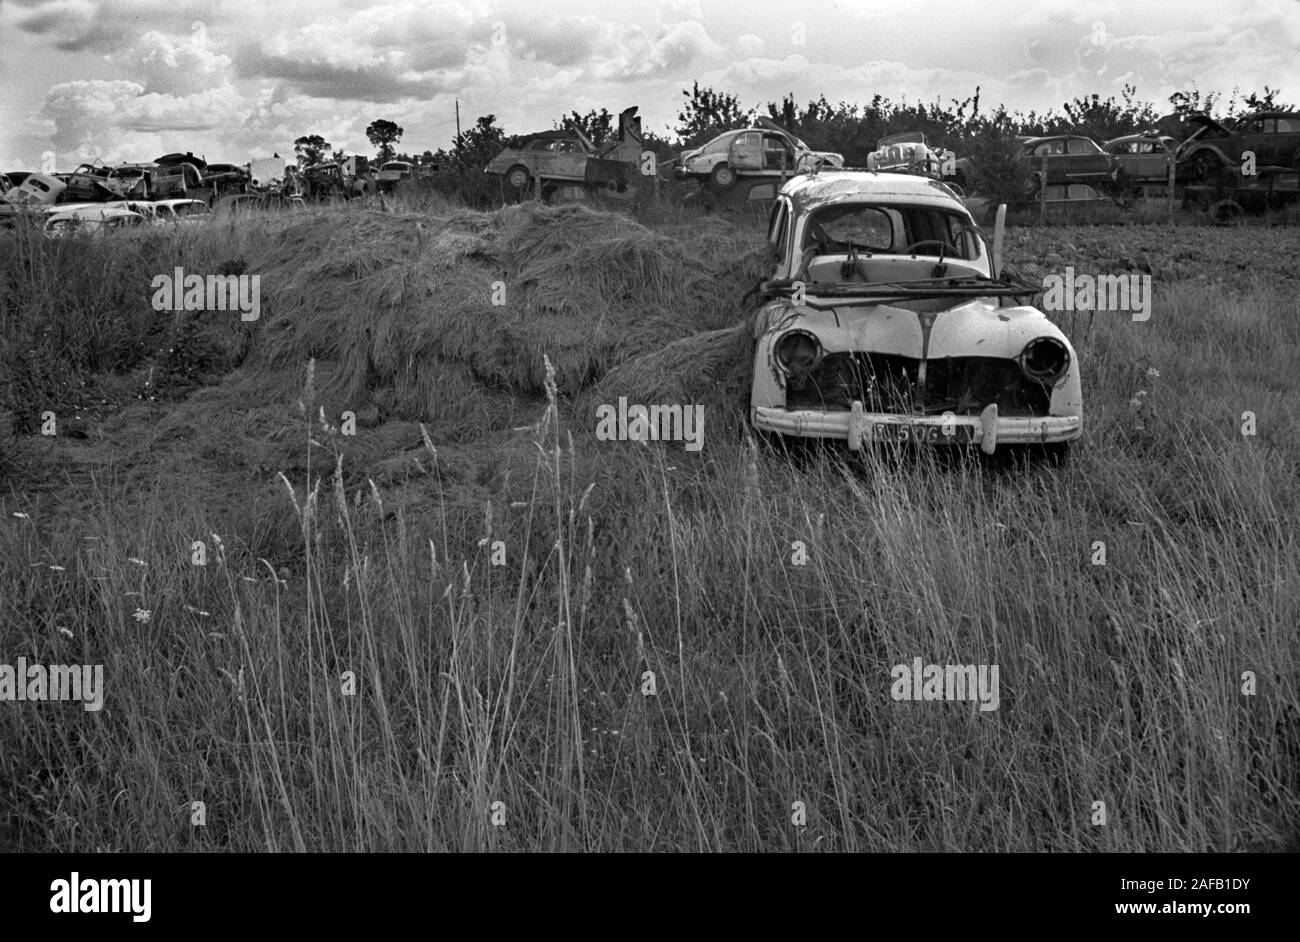 French landscape cars vehicles abandoned after World War II, and dumped in fields in Normandy.  France. 1967 1960s. HOMER SYKES Stock Photo